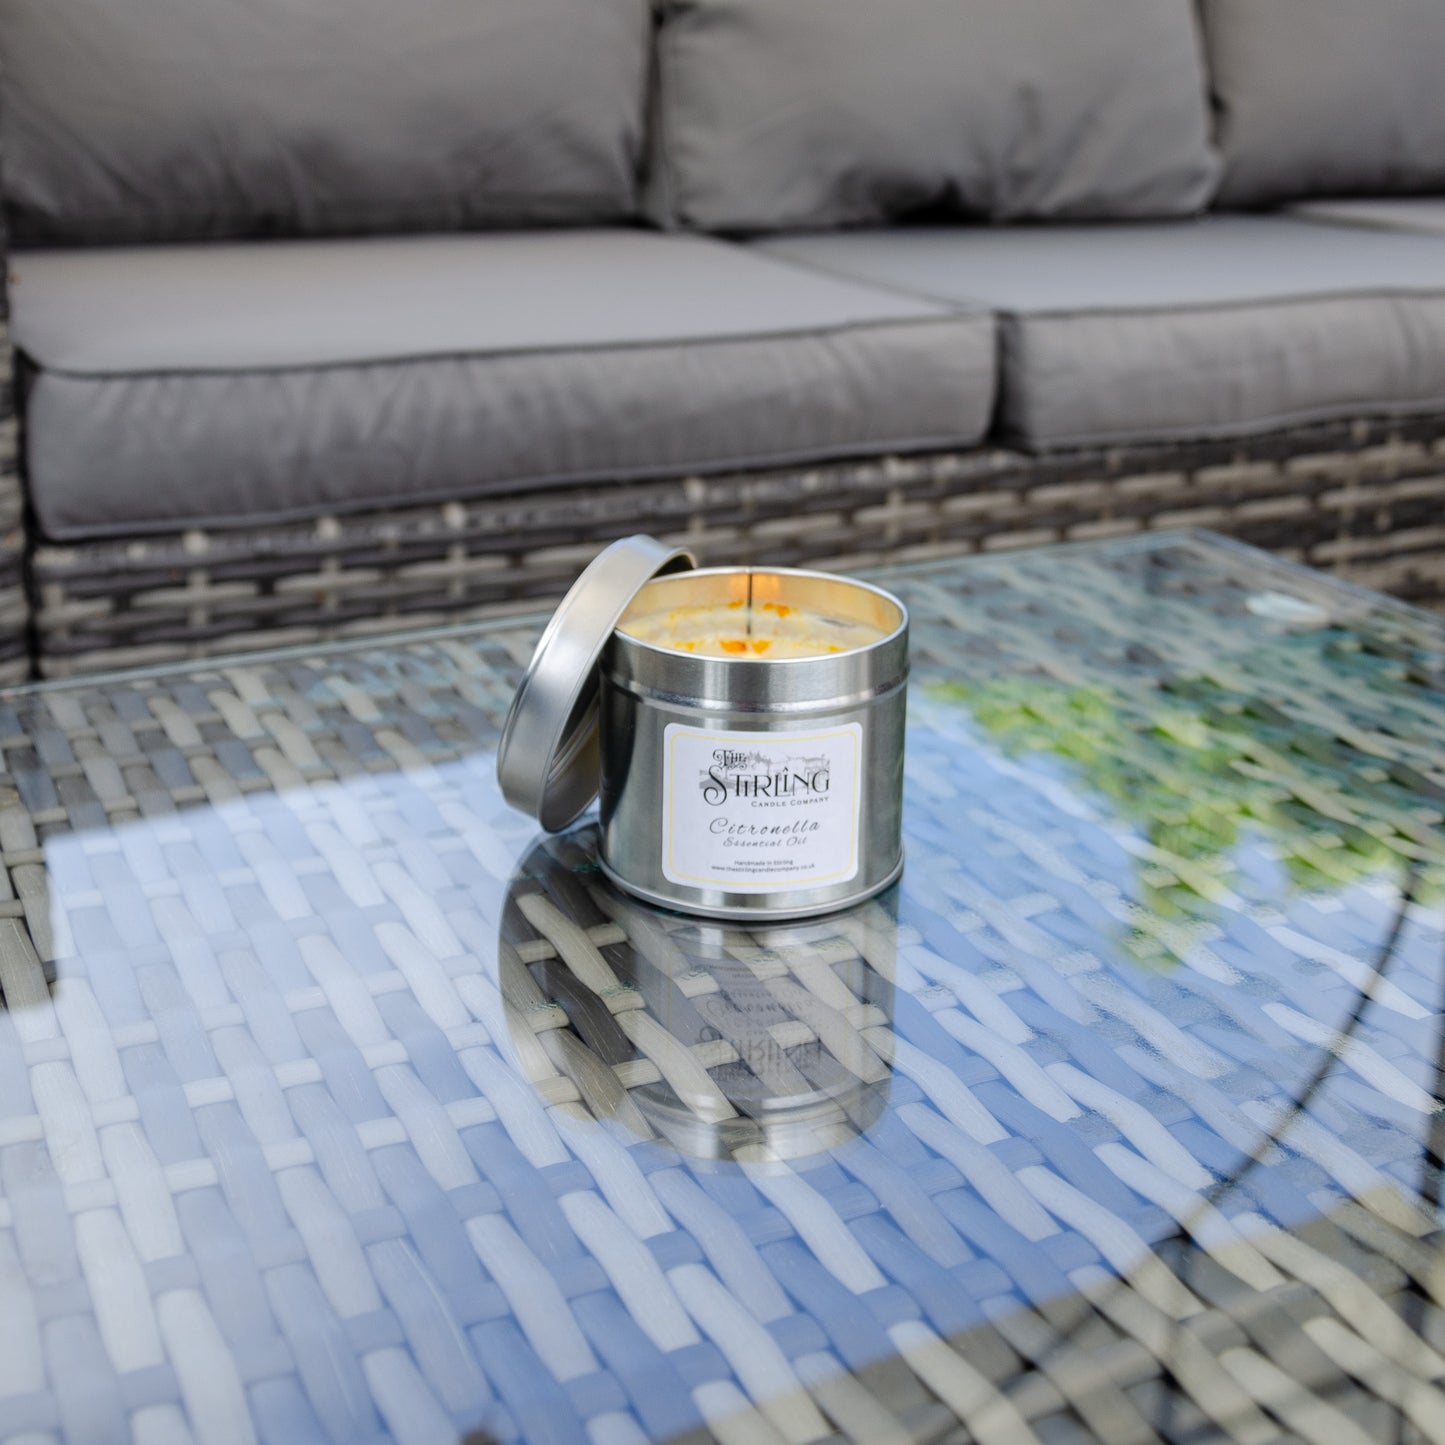 Citronella candle set on a glass table